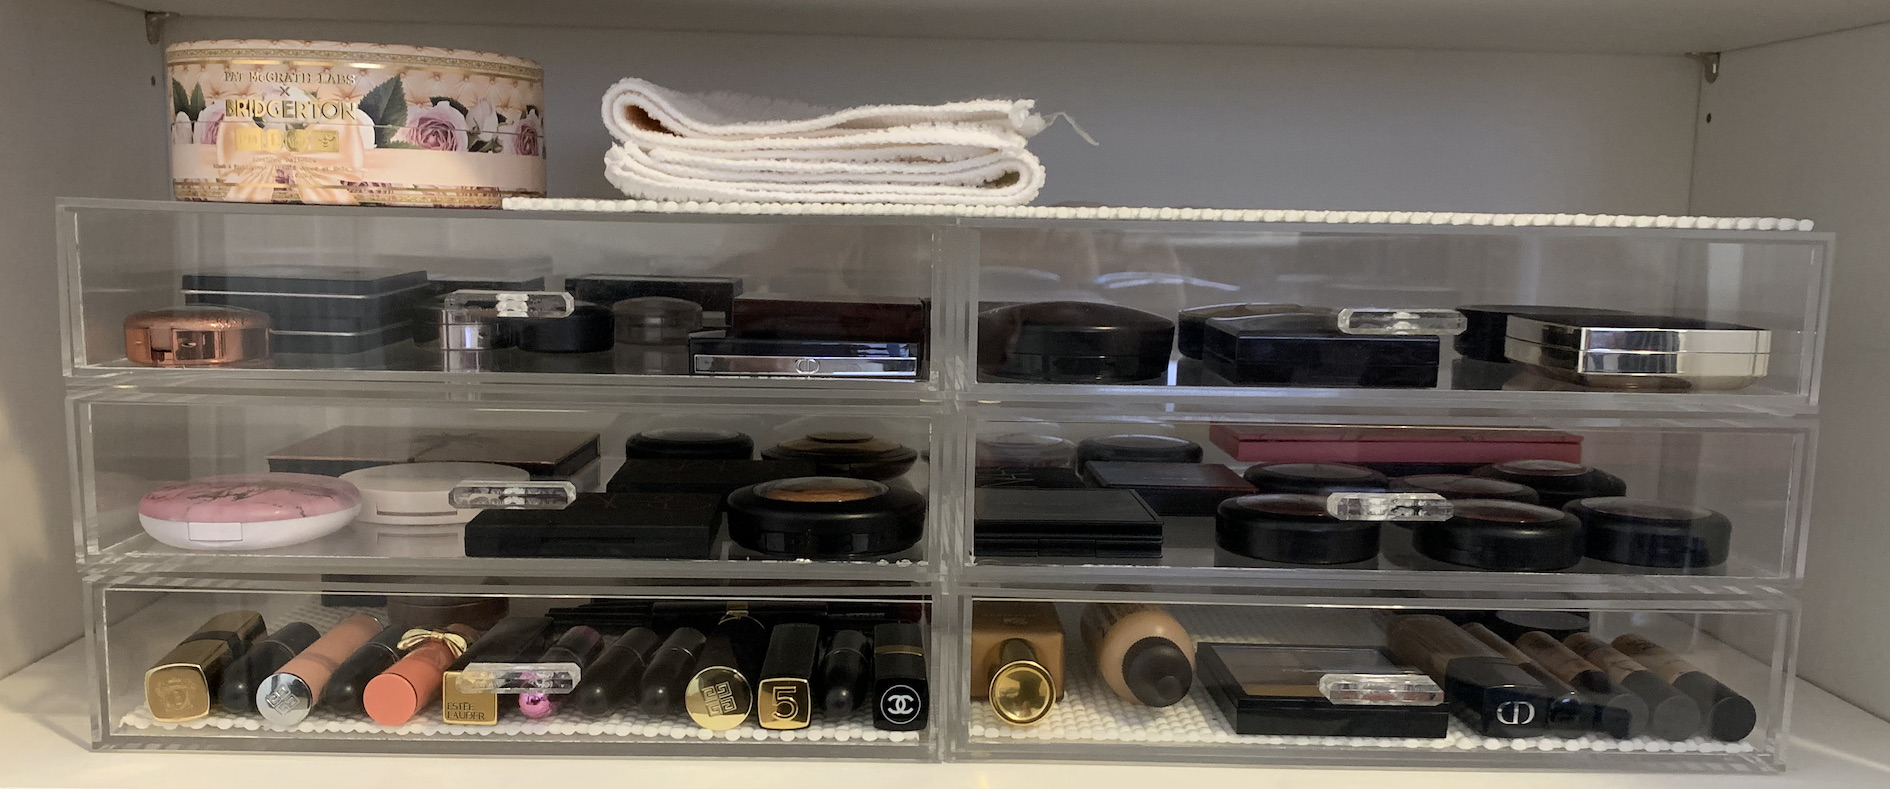 Affordable Makeup Storage and Organizer Ideas – Nikki From HR